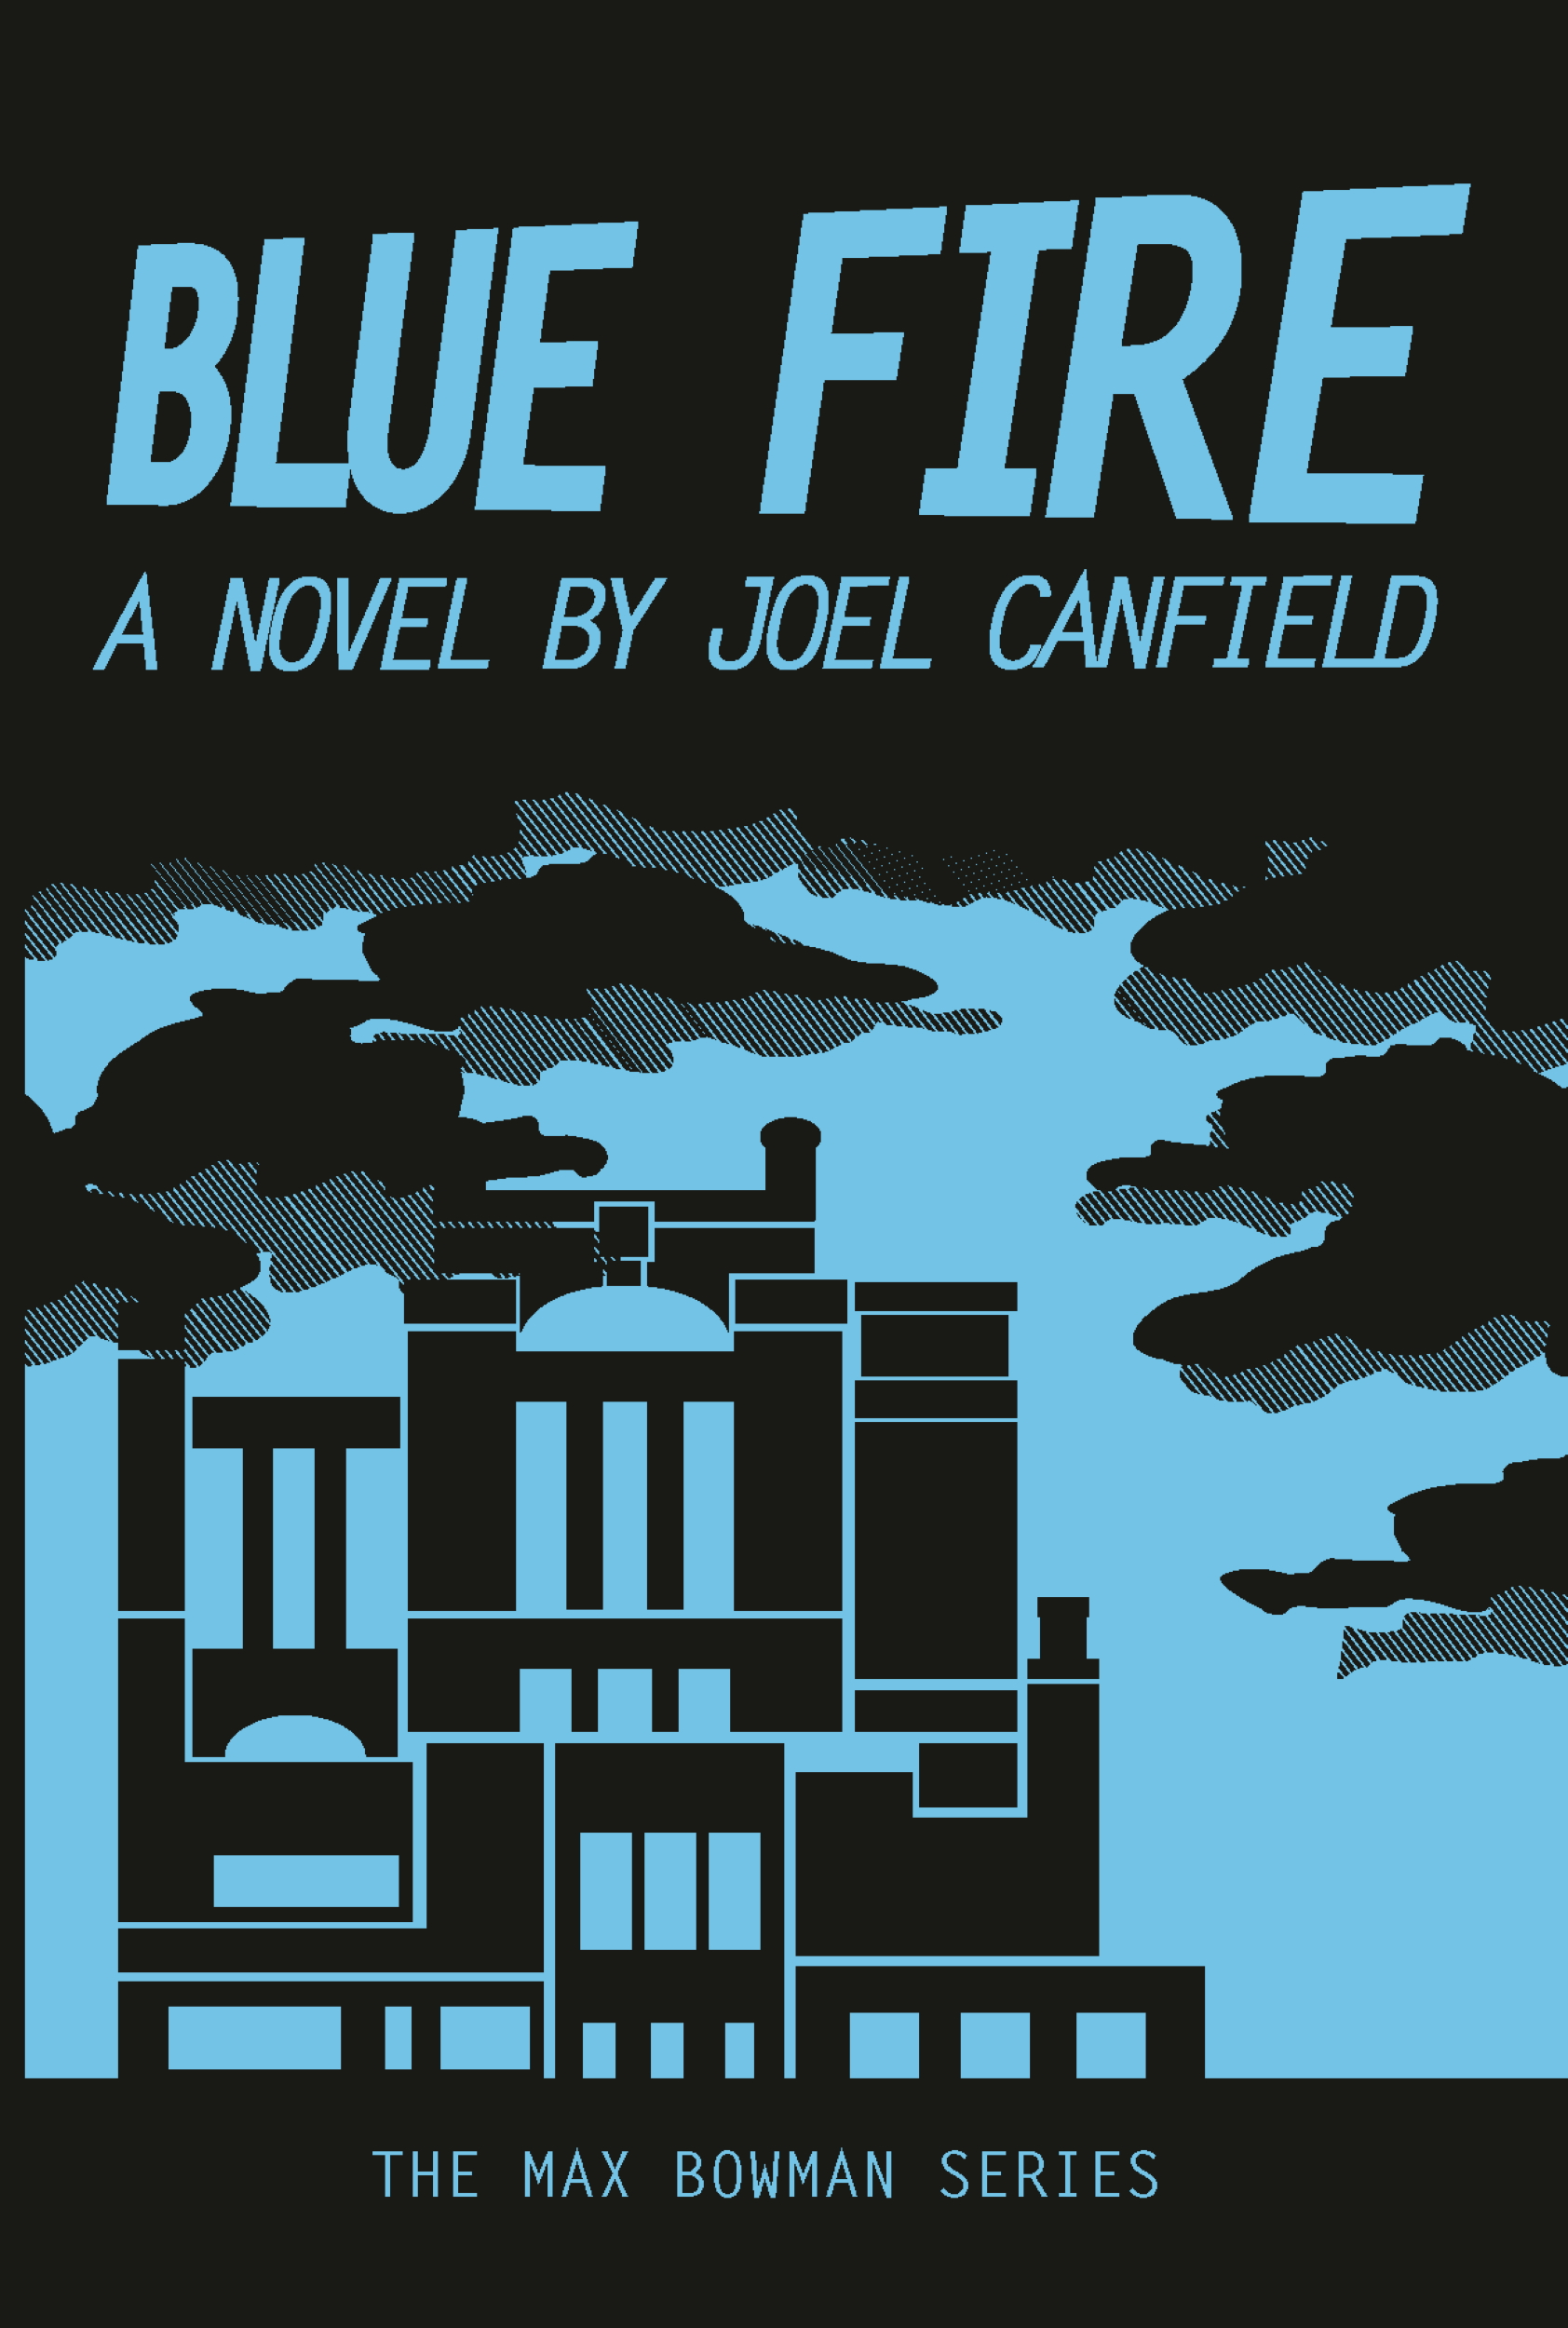 "Blue Fire" (The Misadventures of Max Bowman Book 2) by Joel Canfield